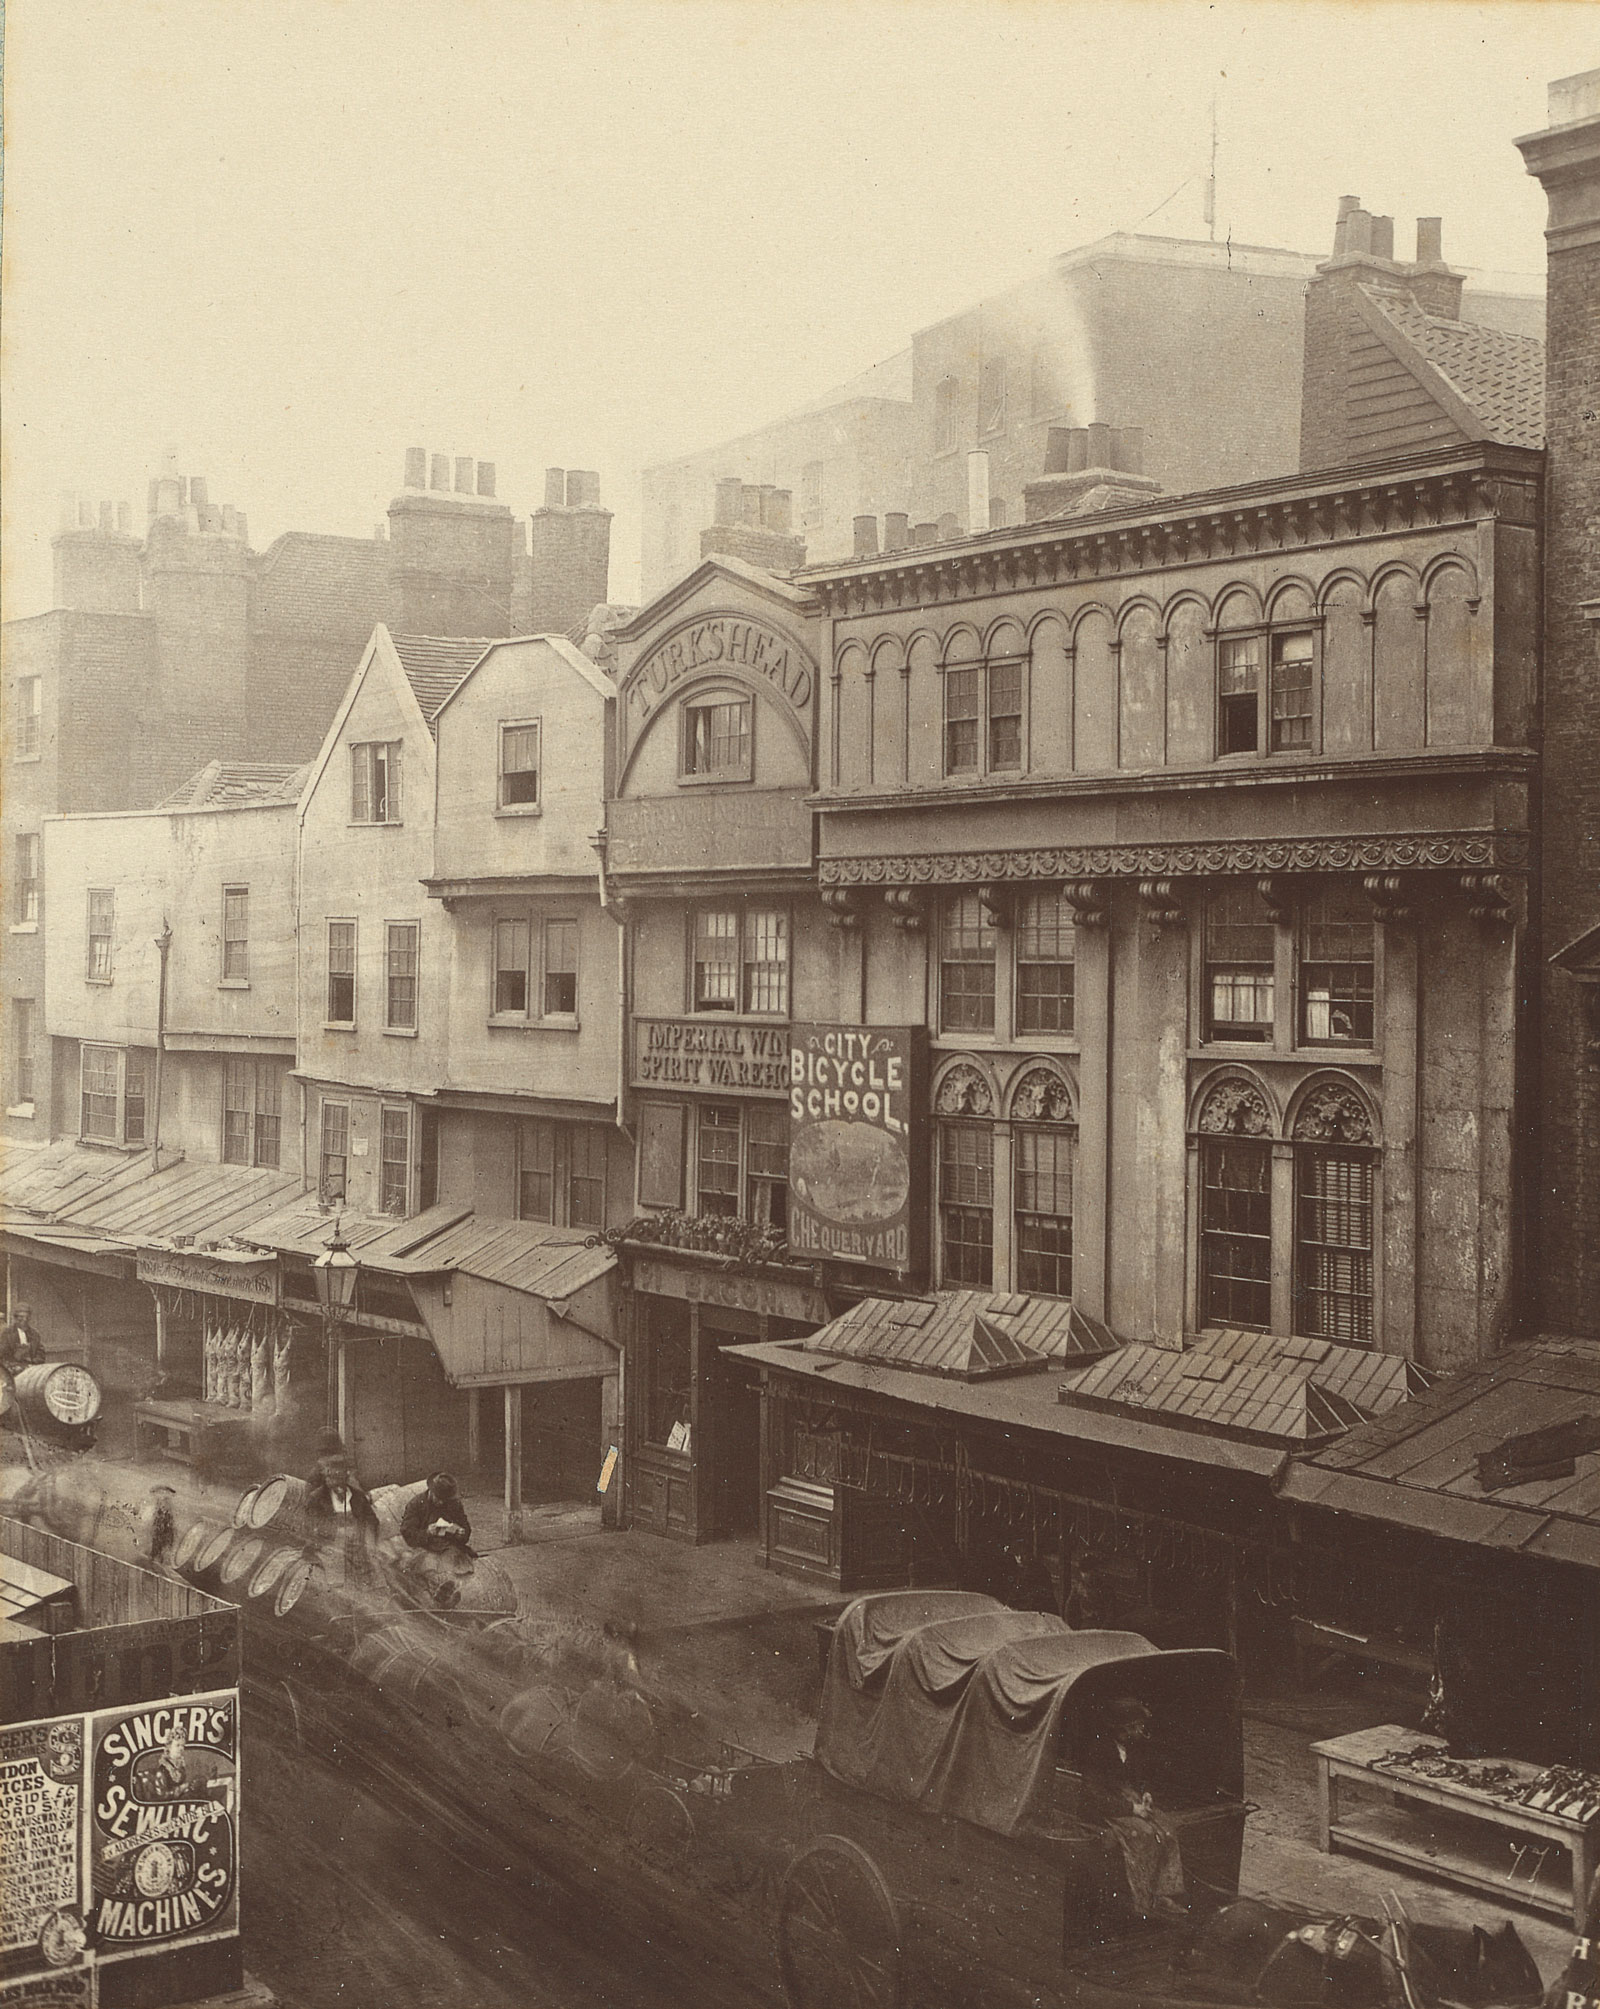 Henry and Thomas James Dixon, no. 77, “Old houses, Aldgate,” 1883